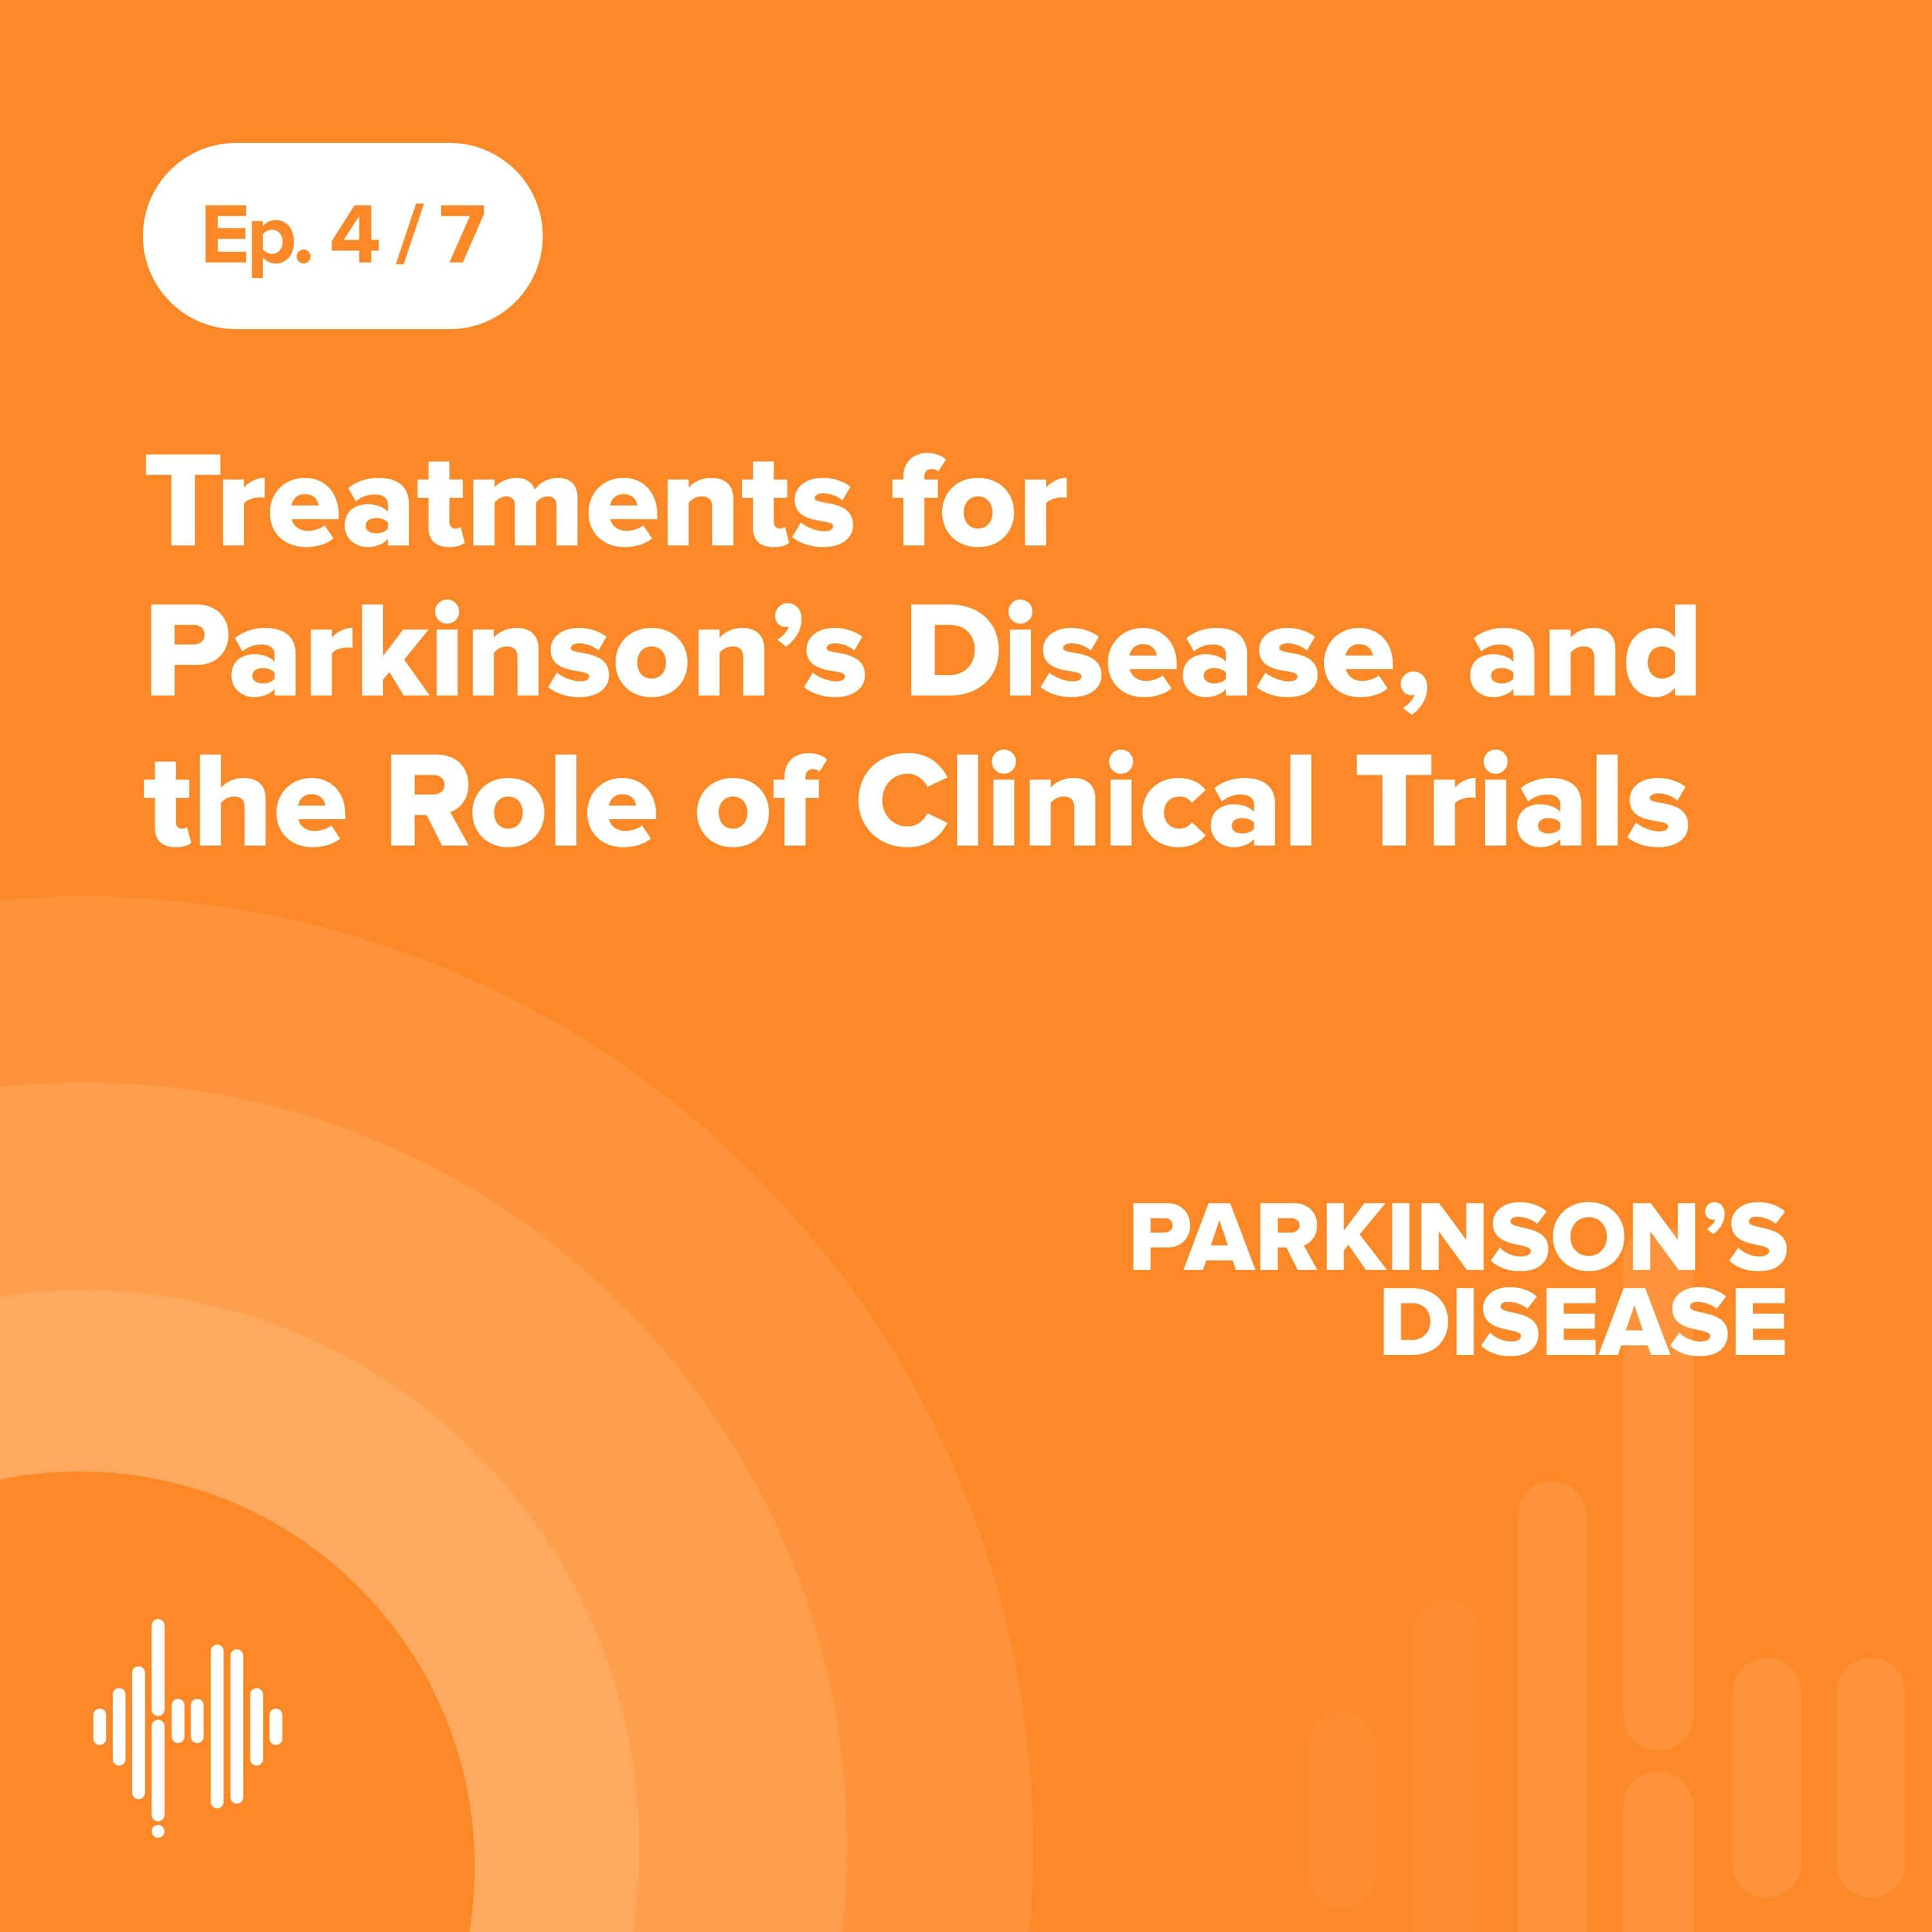 Ep 4: Treatments for Parkinson’s Disease, and the Role of Clinical Trials